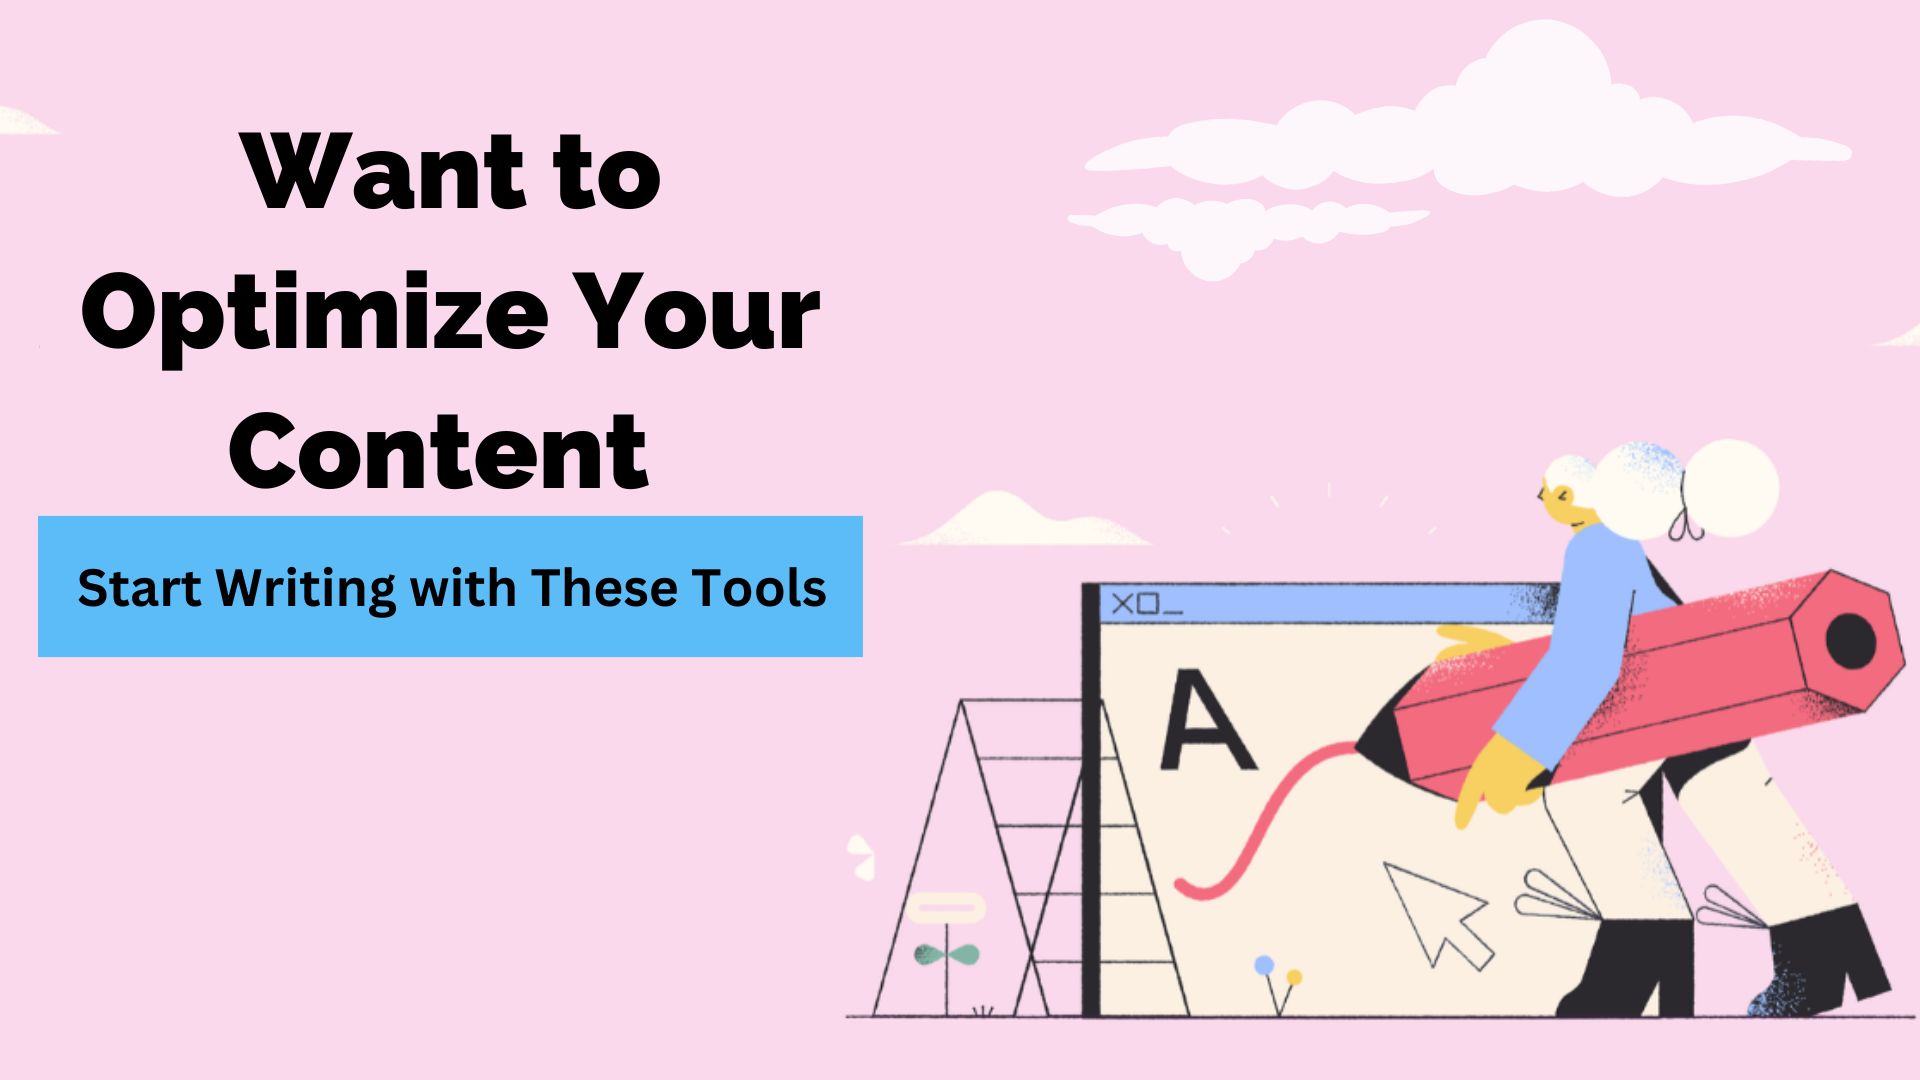 Tools To Optimize Content